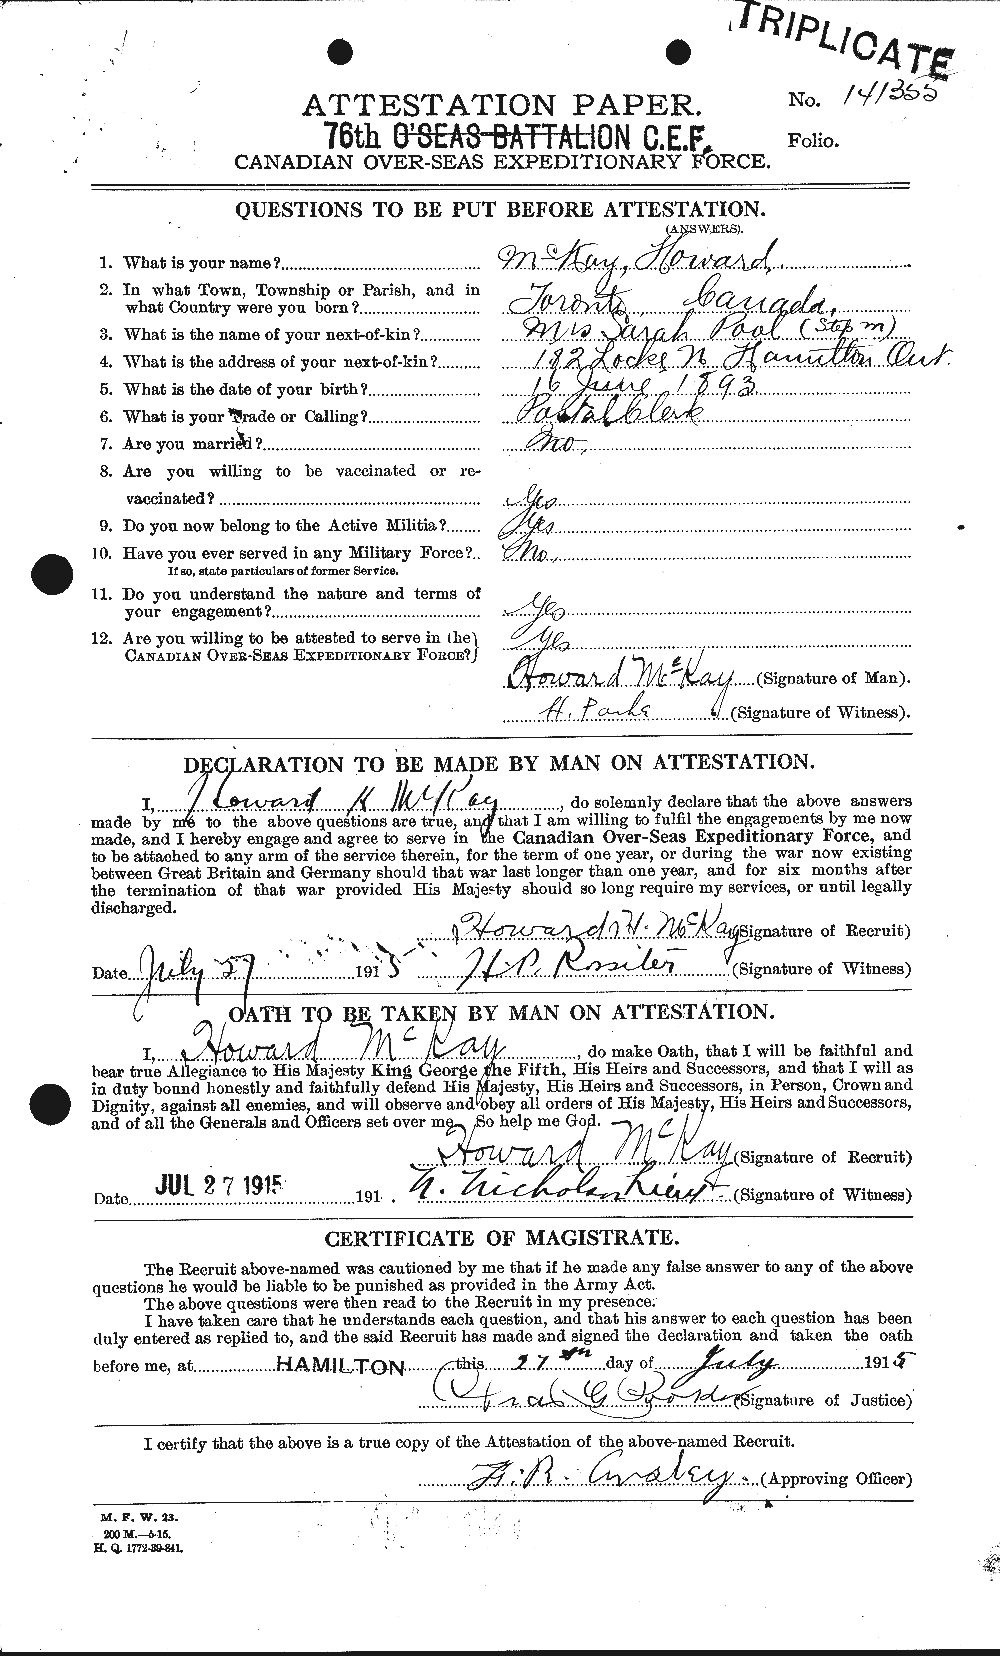 Personnel Records of the First World War - CEF 534752a